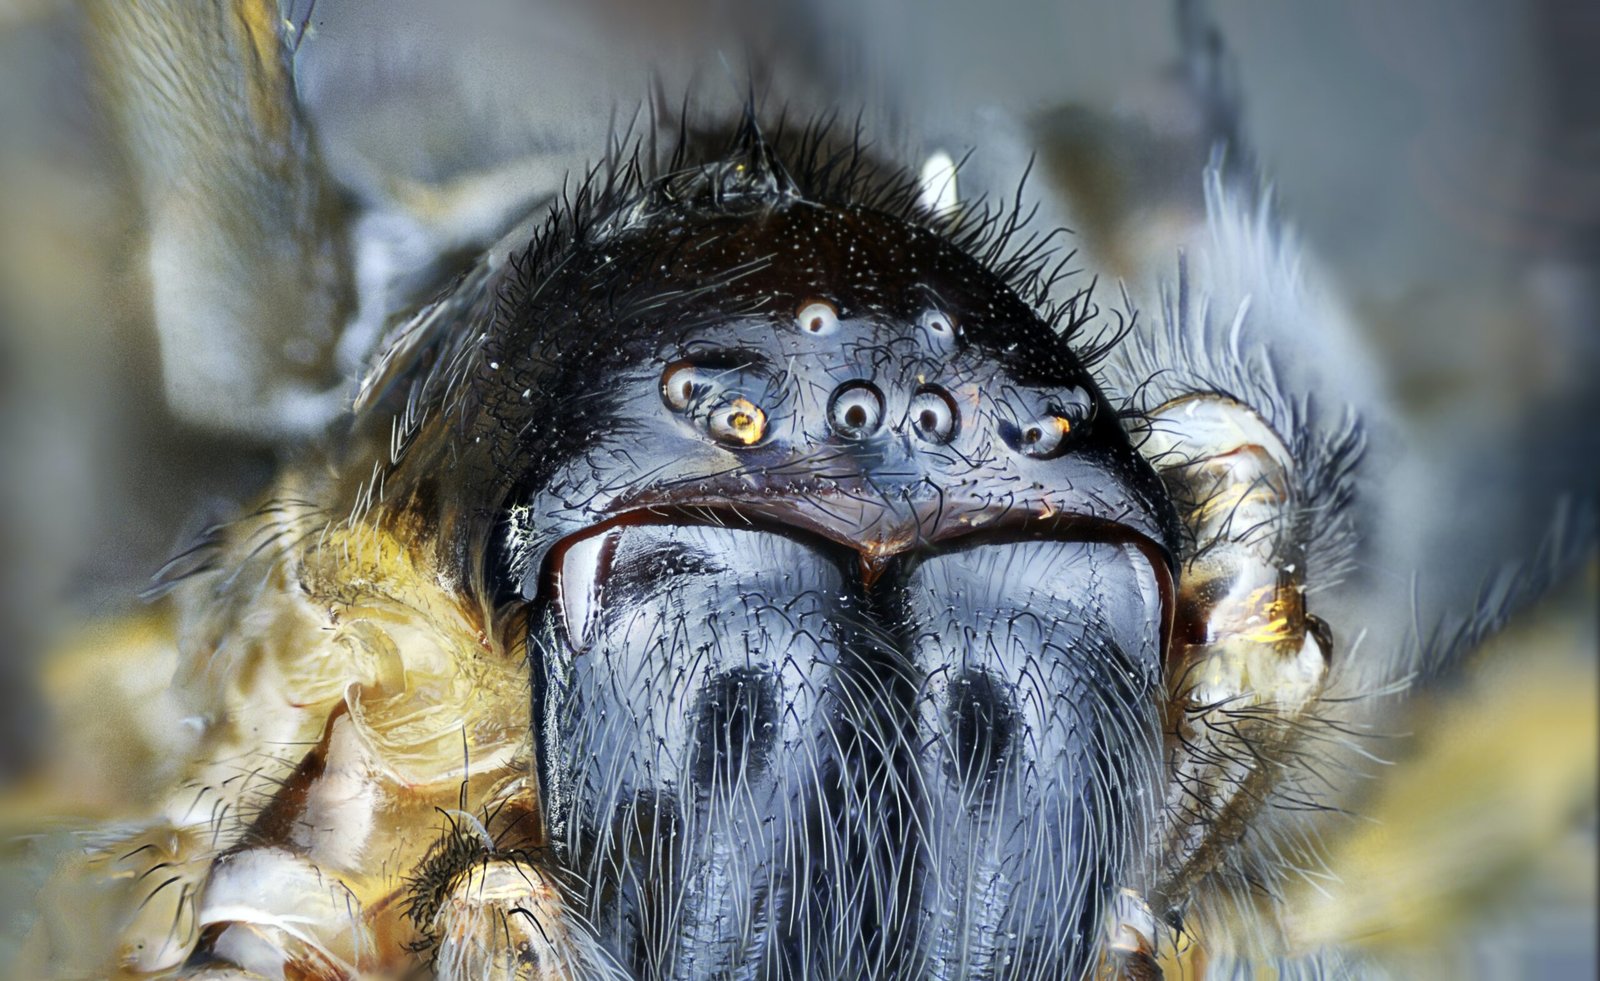 How Do Tarantulas Defend Themselves Against Threats From Other Spider Species?